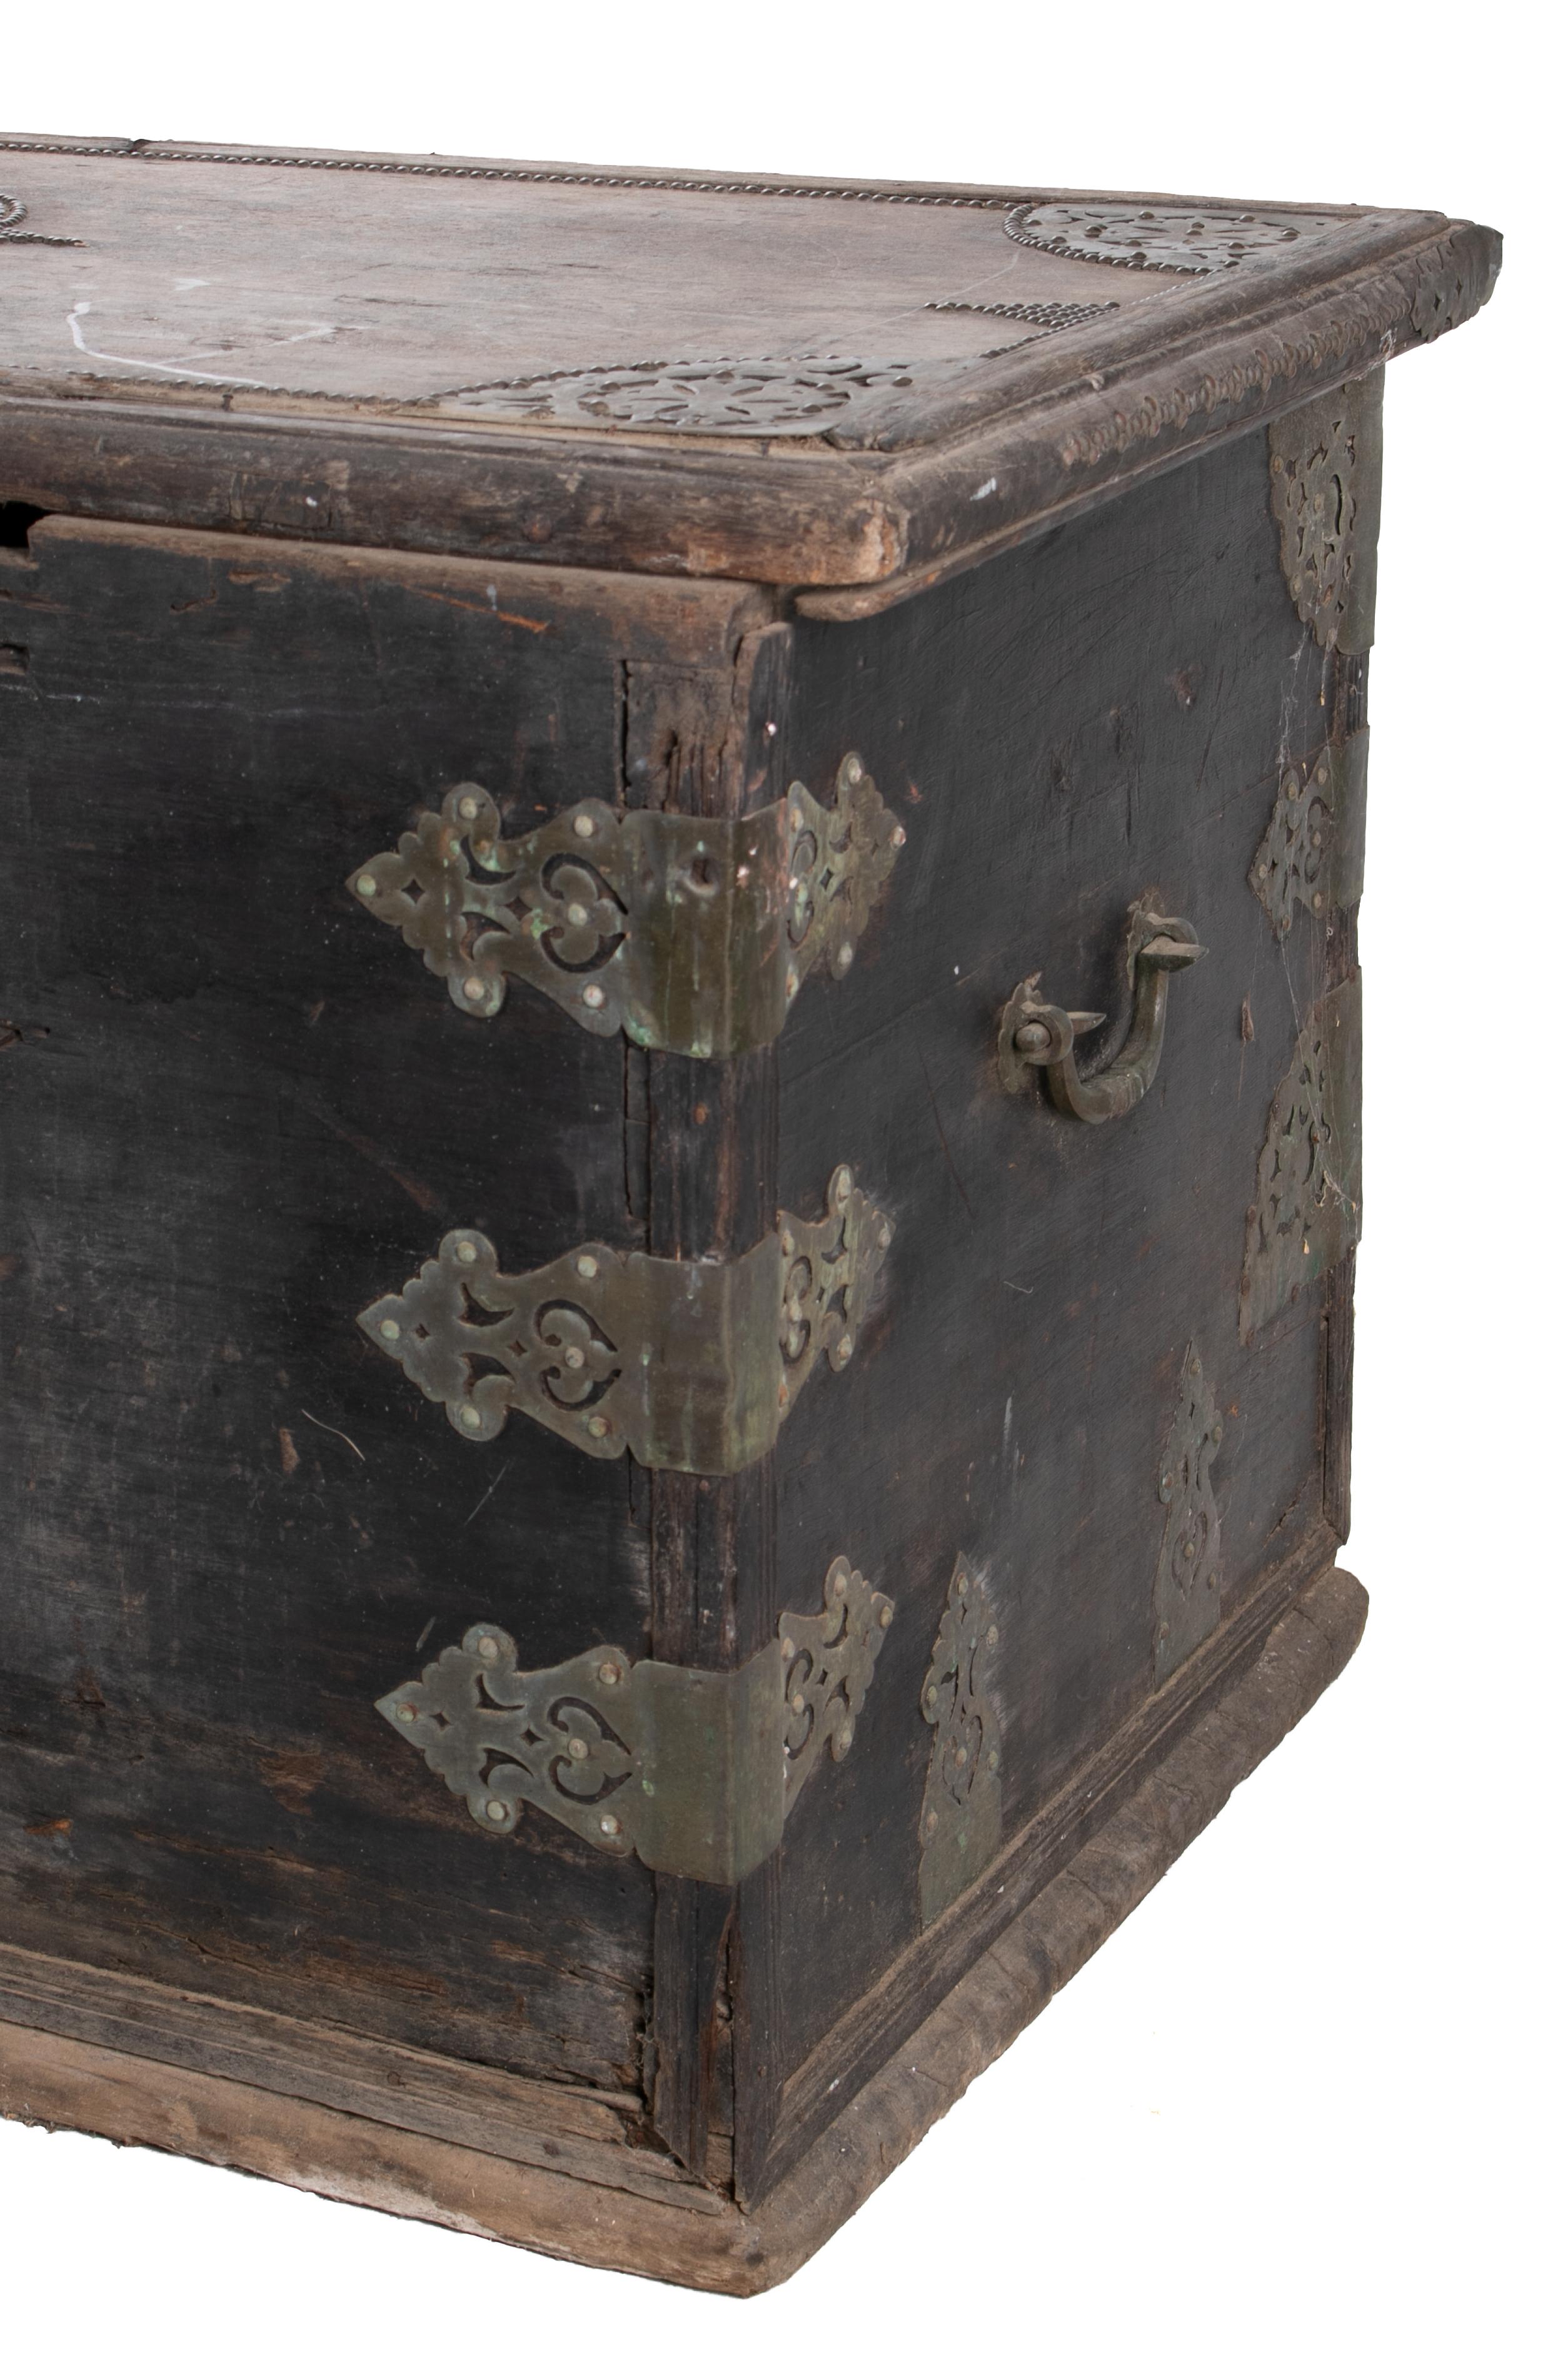 19th Century Turkish Wooden Trunk with Bronze Decorations and Fittings 1